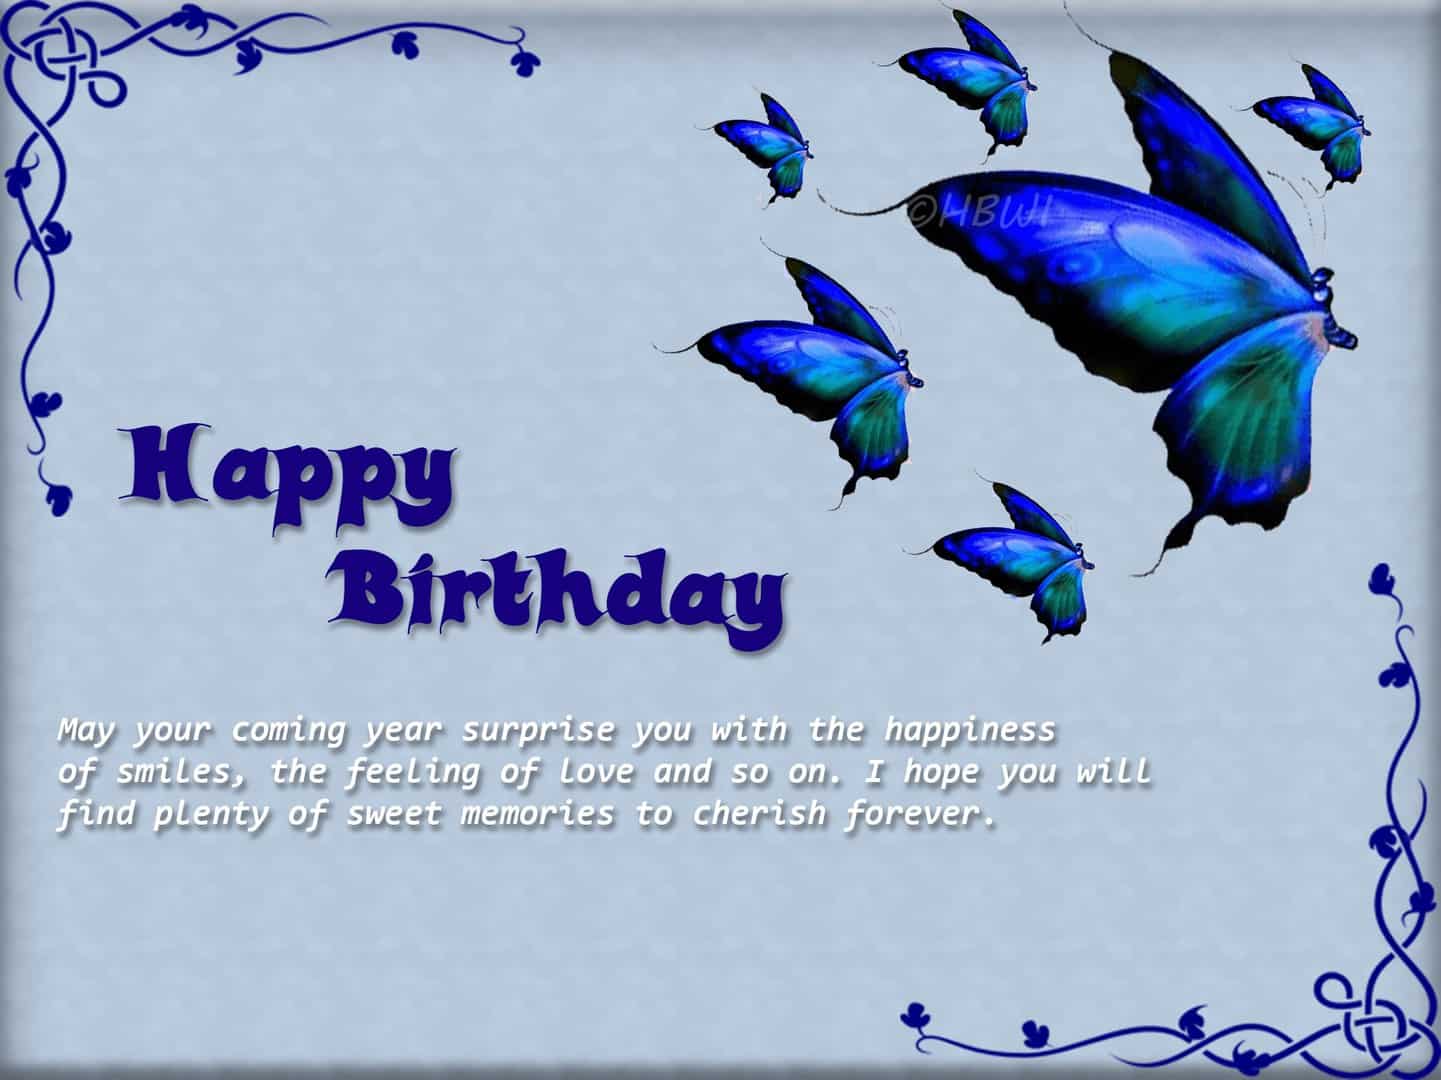 Wish all living butterfly happy birthday to you